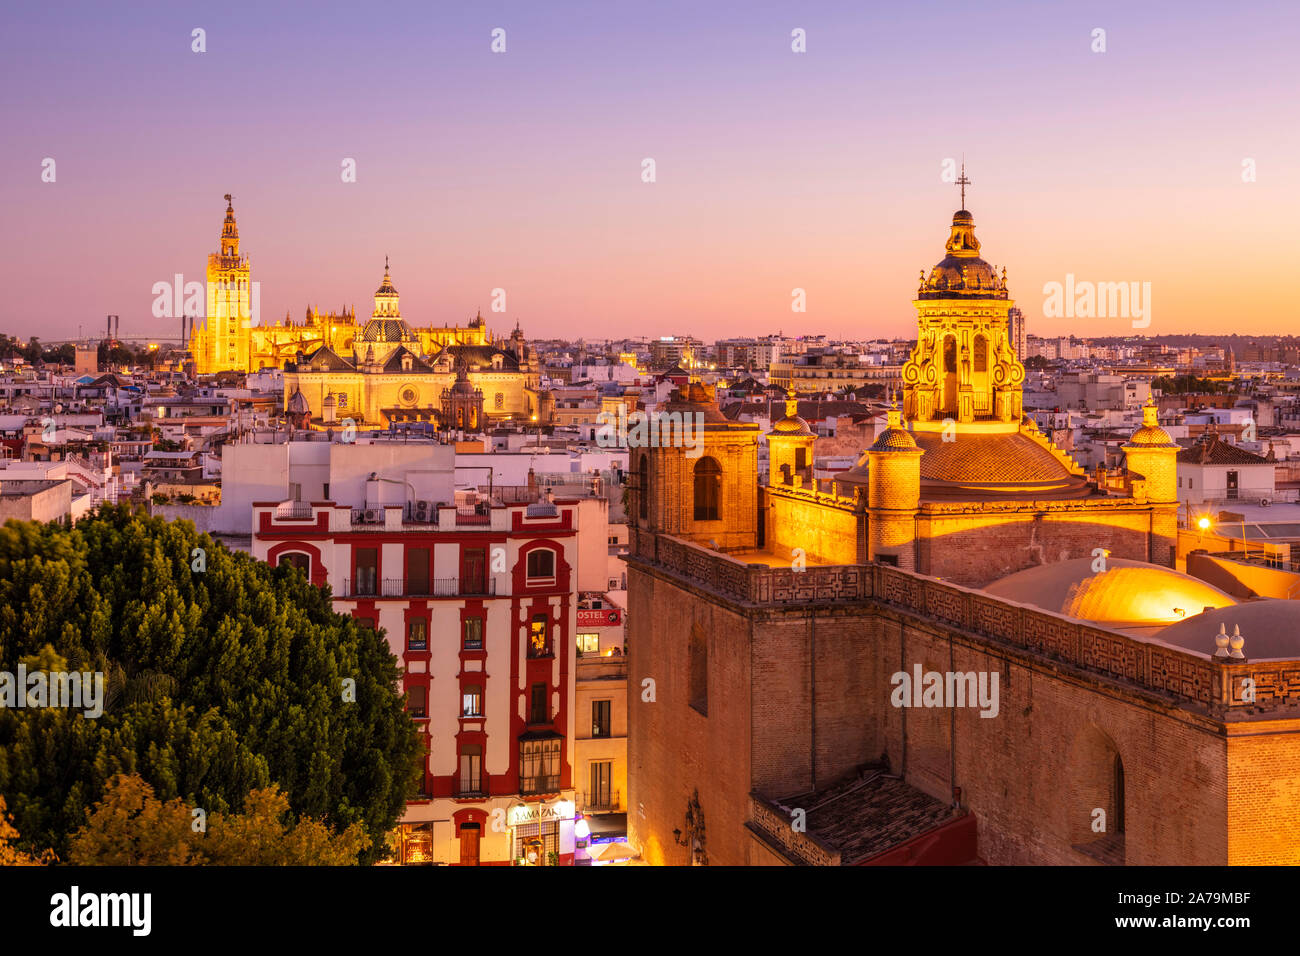 Sunset Seville skyline view of Seville cathedral La Giralda bell tower Anunciation Church and city rooftops Seville Spain Seville Andalusia Spain EU Stock Photo